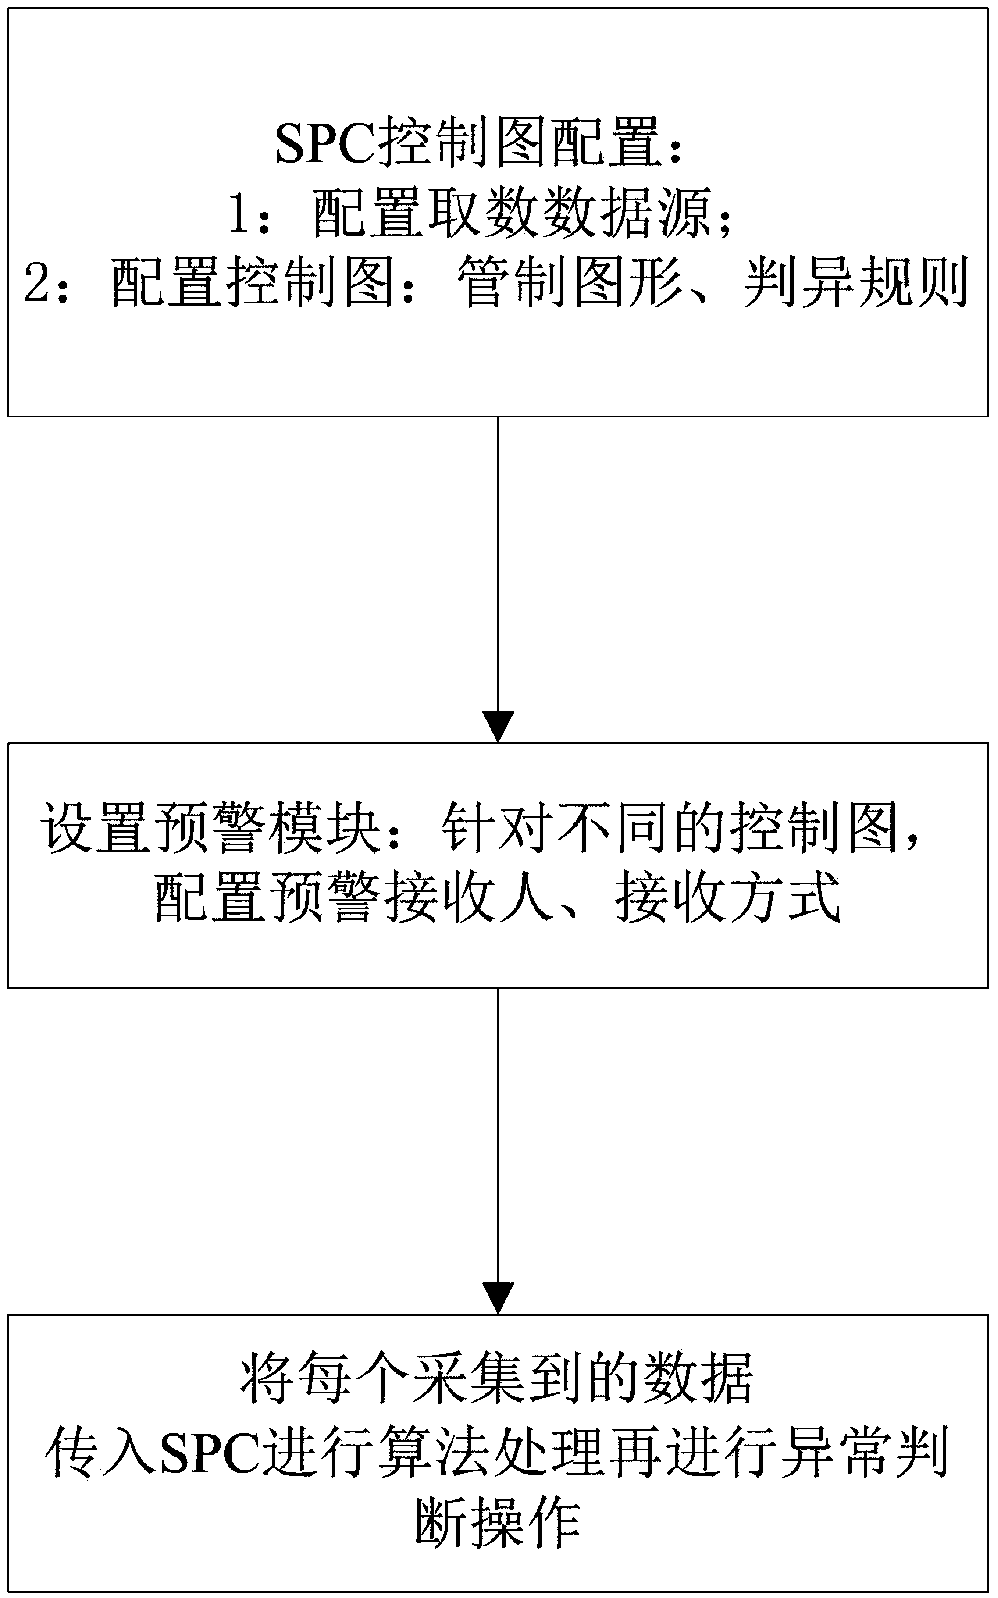 SPC (statistical process control)-based linkage control method and system